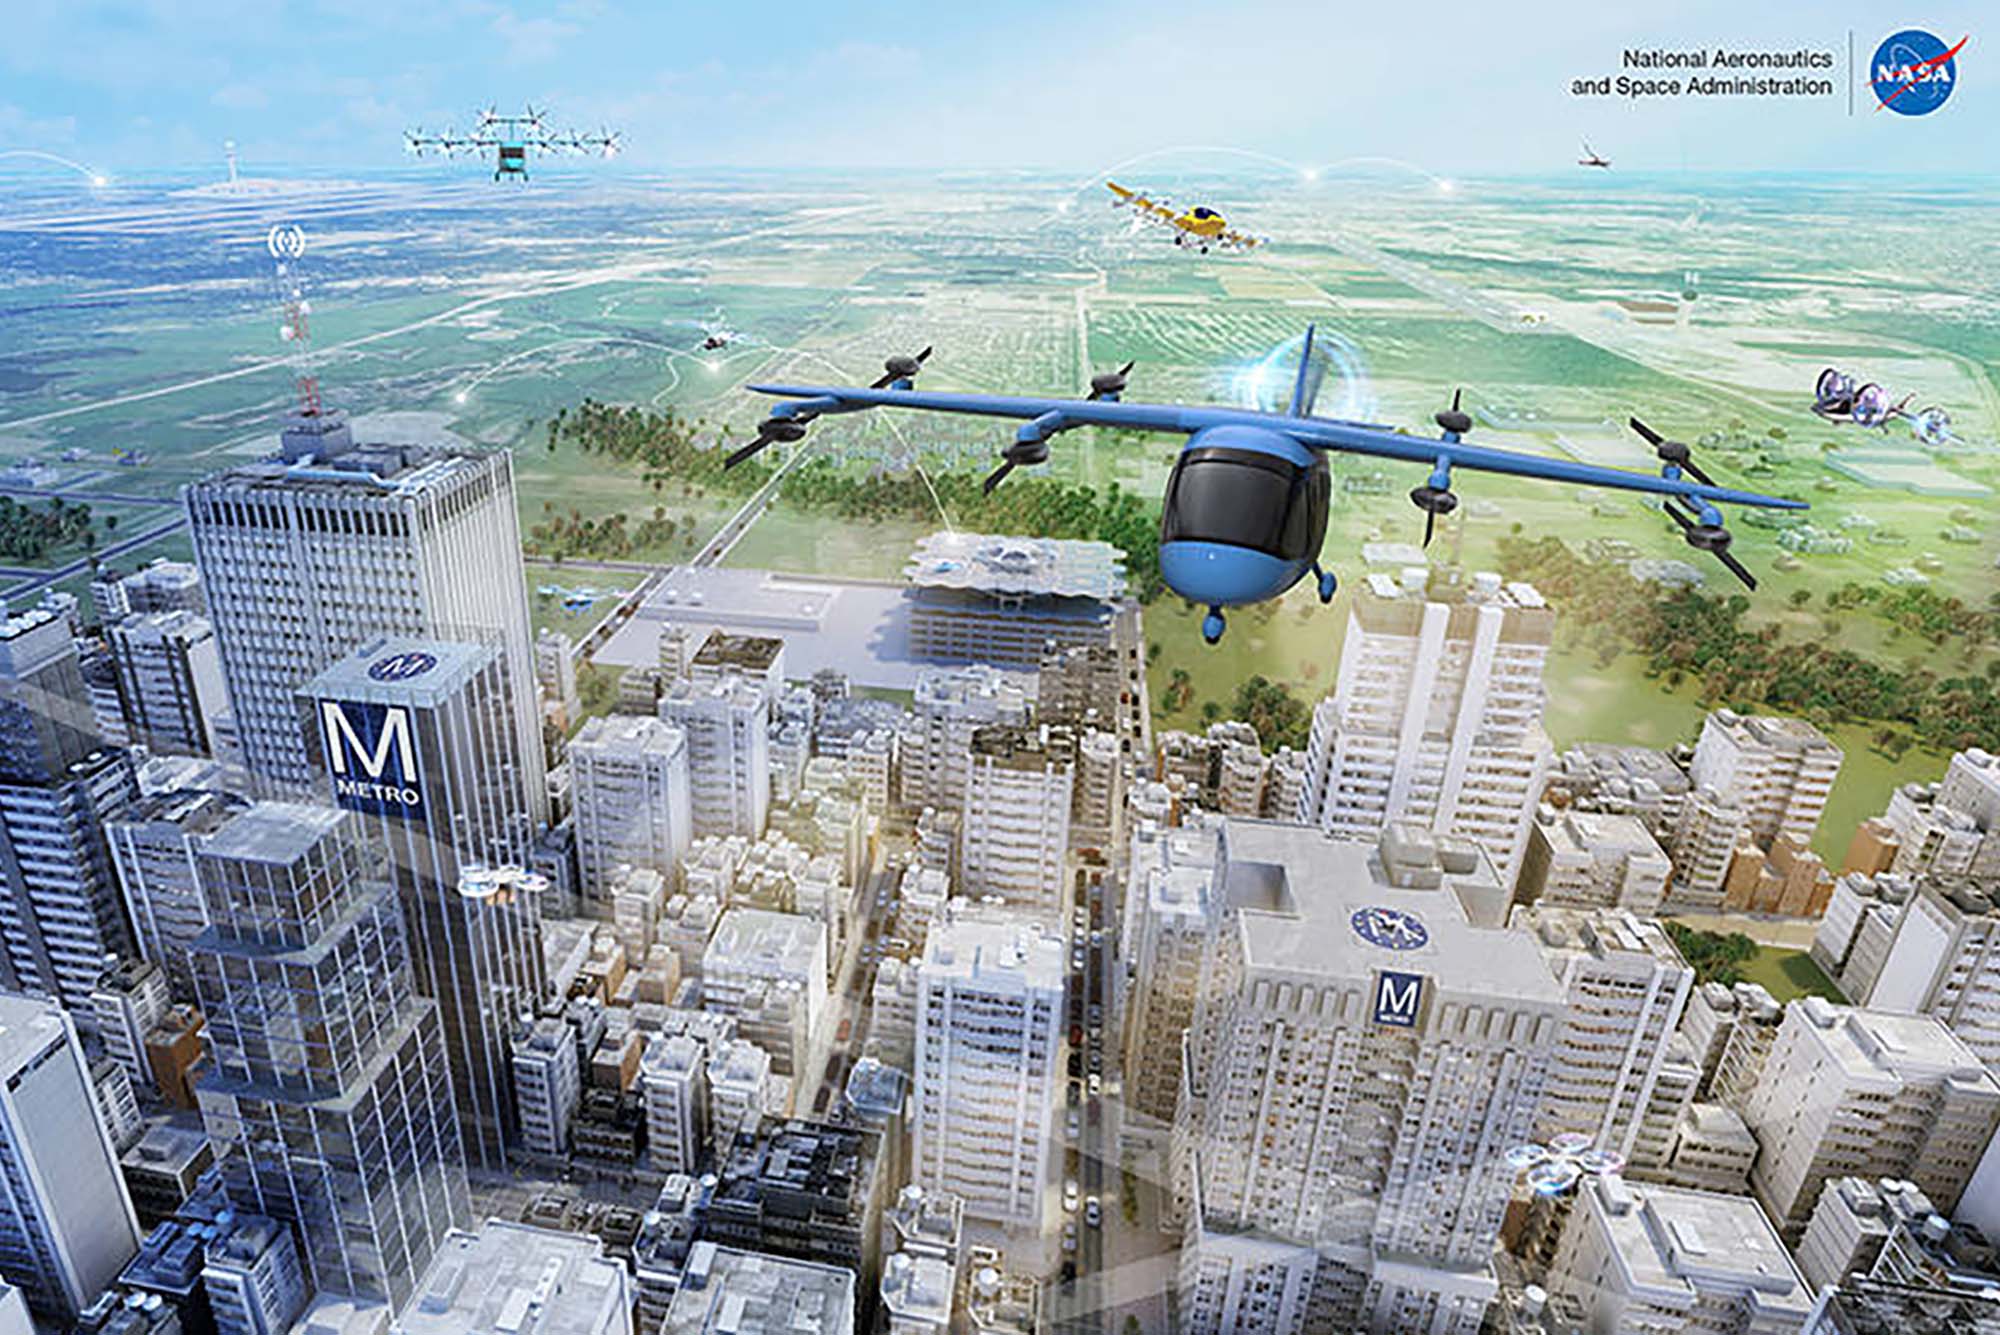 Image: Concept illustration of Advanced Air Mobility, with its many vehicle concepts and potential uses in both local and intraregional applications. Mockup of multiple types of aircrafts are depicted flying over urban, suburban and rural areas.